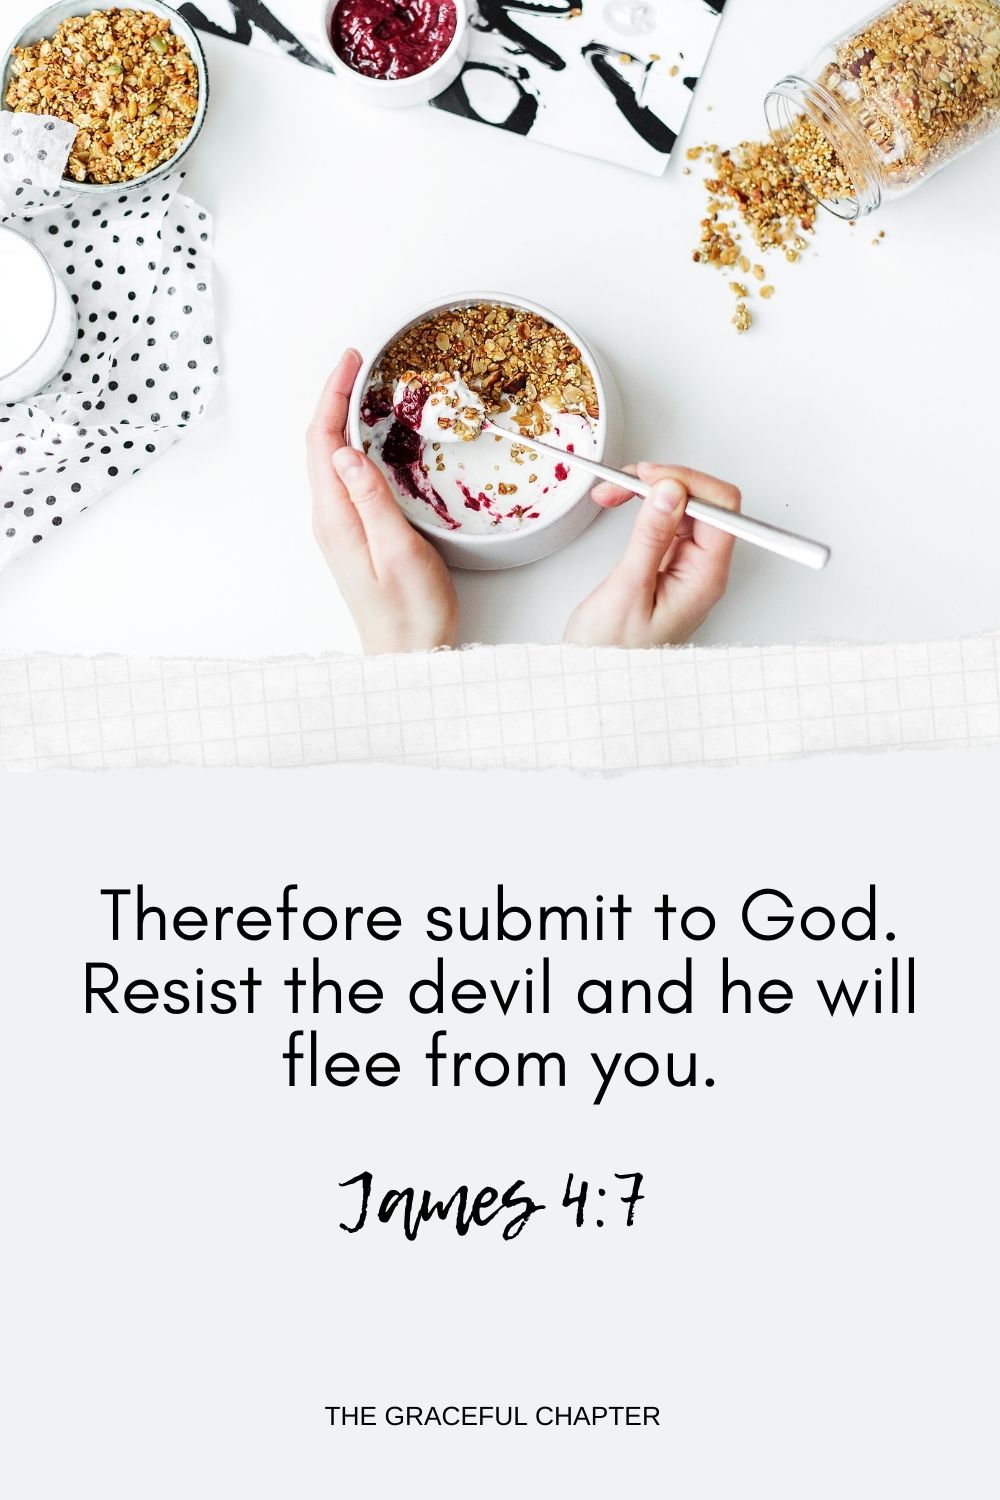 Therefore submit to God. Resist the devil and he will flee from you. James 4:7